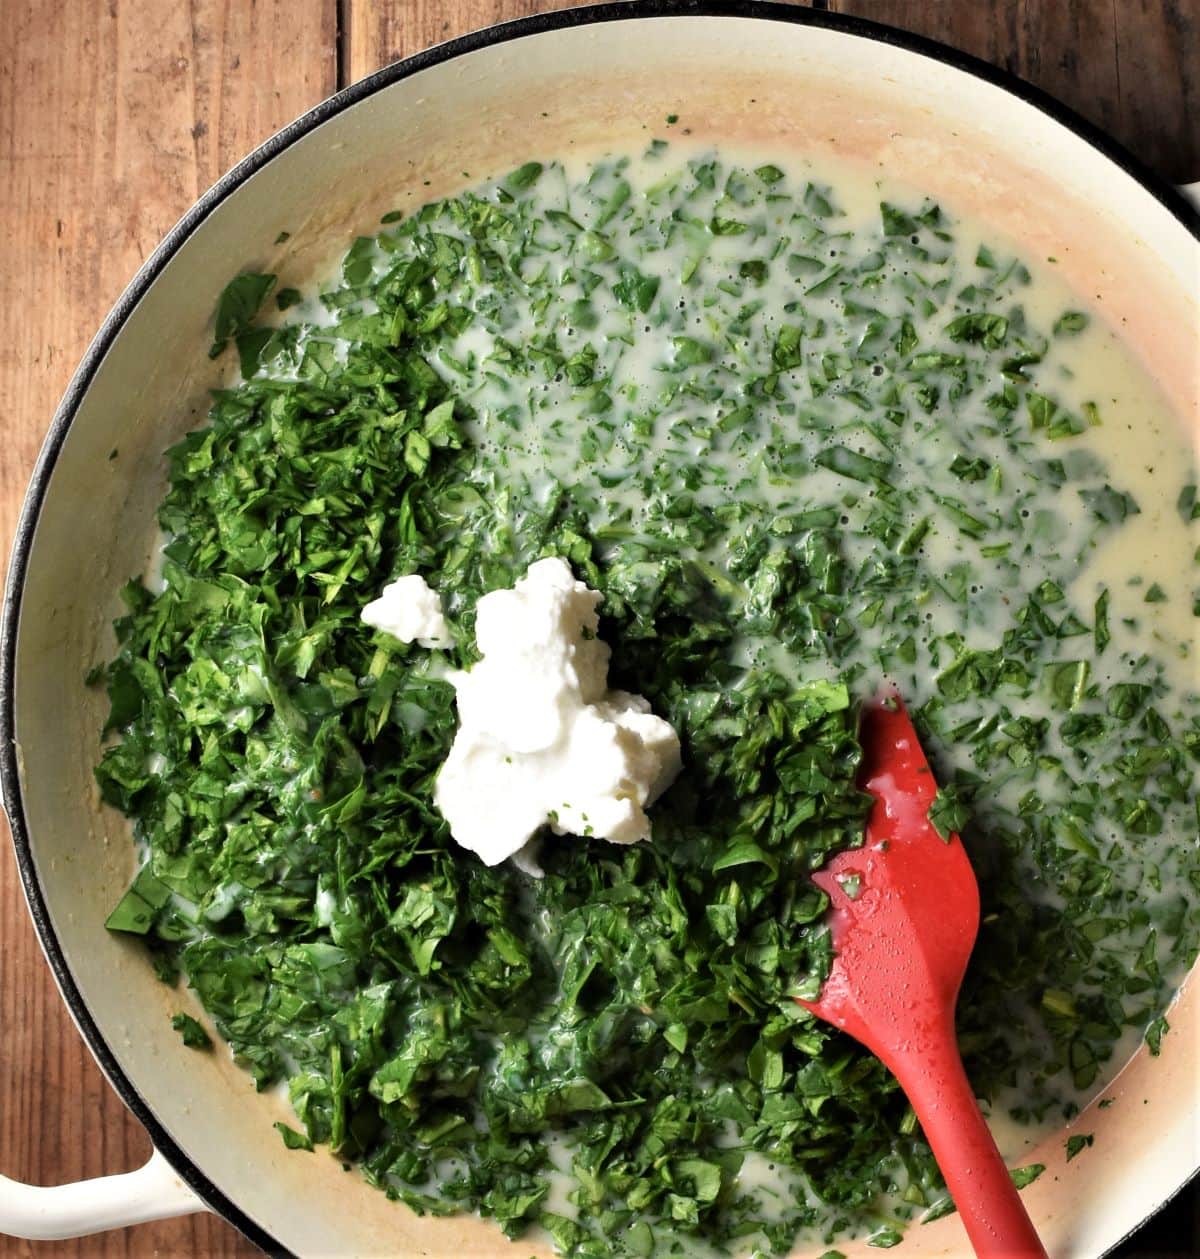 Making spinach sauce with yogurt in large shallow pan with red spatula.